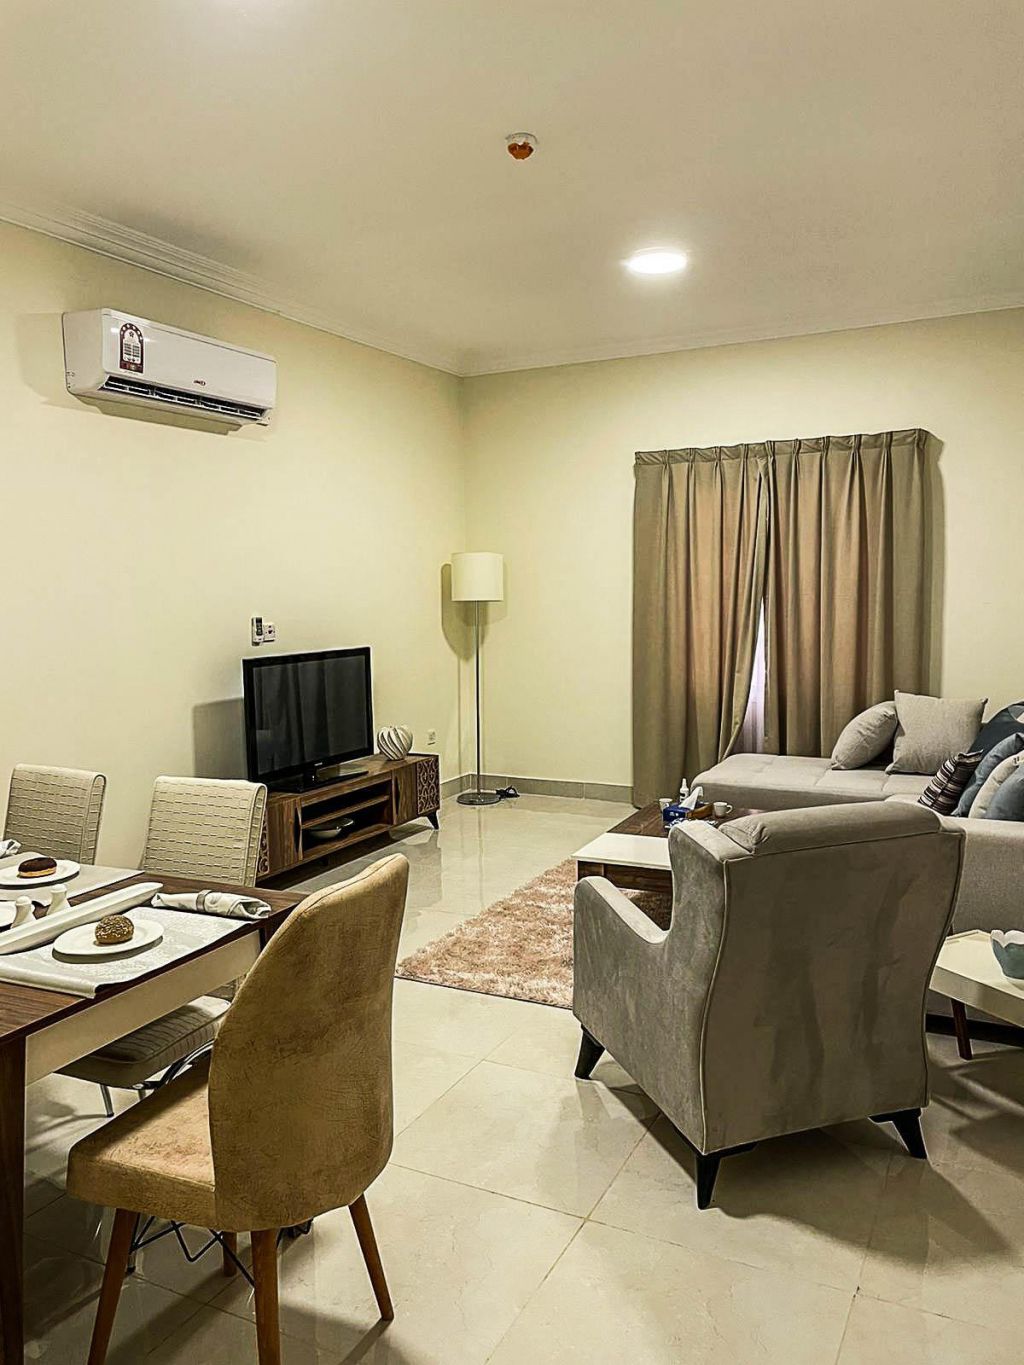 Residential Property 2 Bedrooms F/F Apartment  for rent in Al-Sadd , Doha-Qatar #14531 - 1  image 